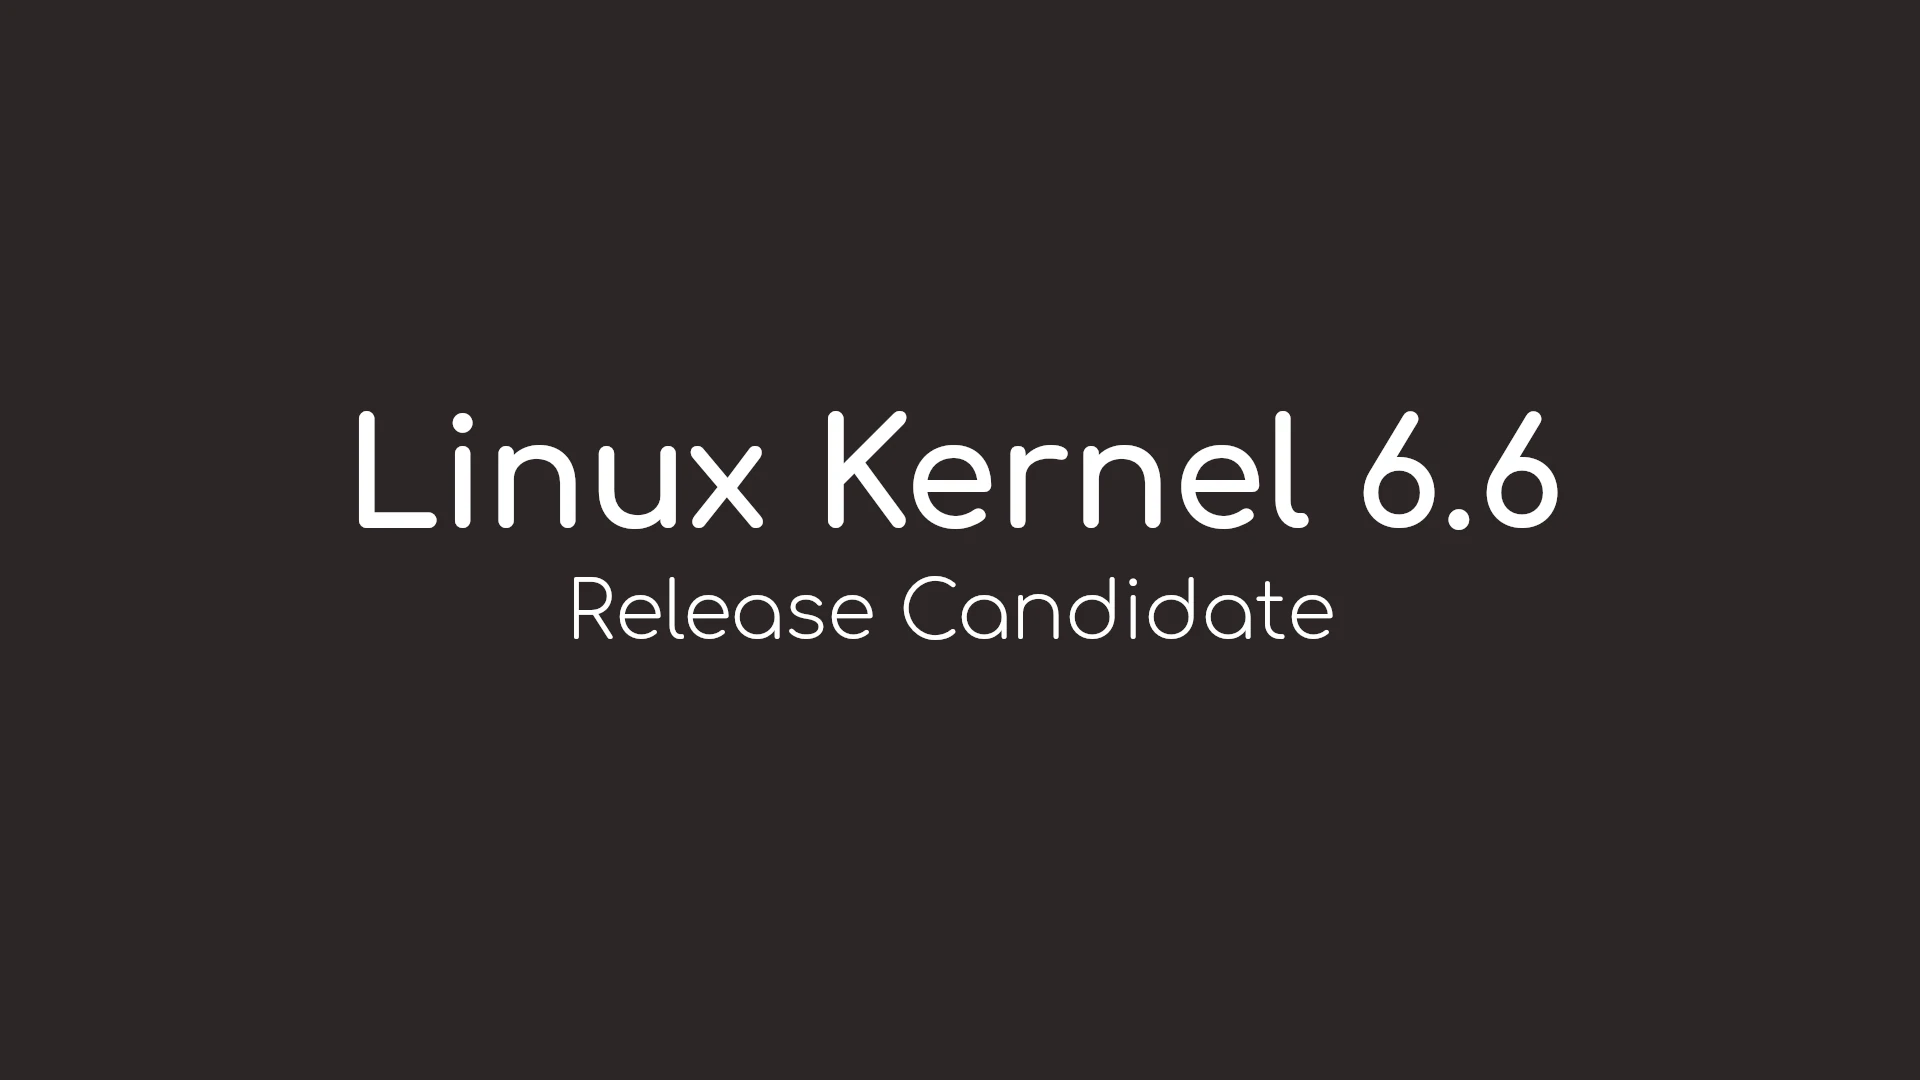 Linus Torvalds Announces First Linux Kernel 6.6 Release Candidate